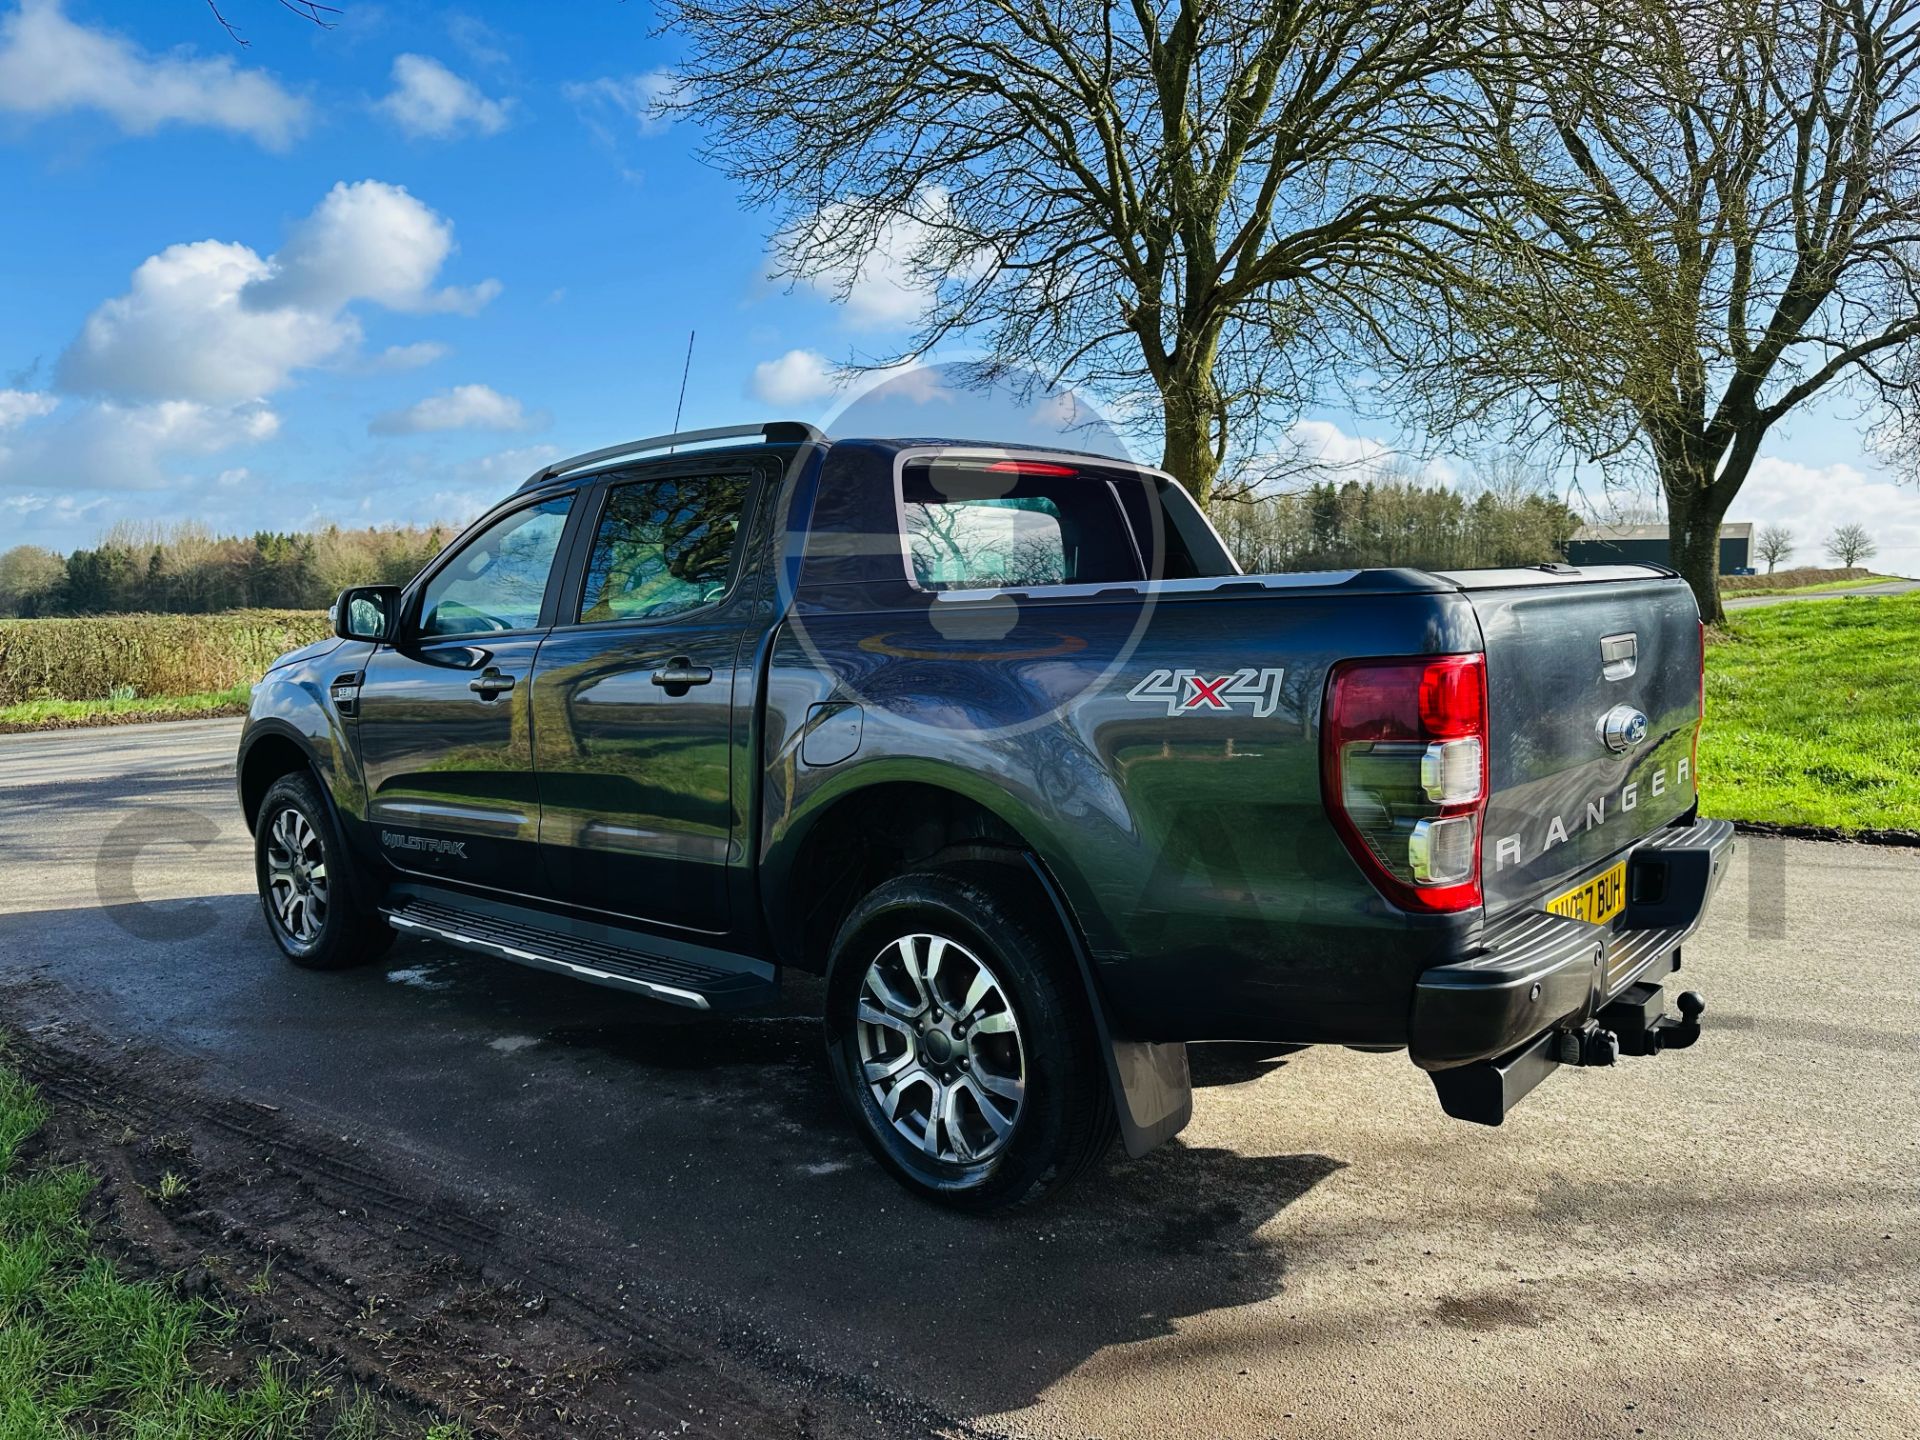 FORD RANGER *WILDTRAK EDITION* DOUBLE CAB PICK-UP (2018 - EURO 6) 3.2 TDCI - AUTOMATIC (1 OWNER) - Image 7 of 37